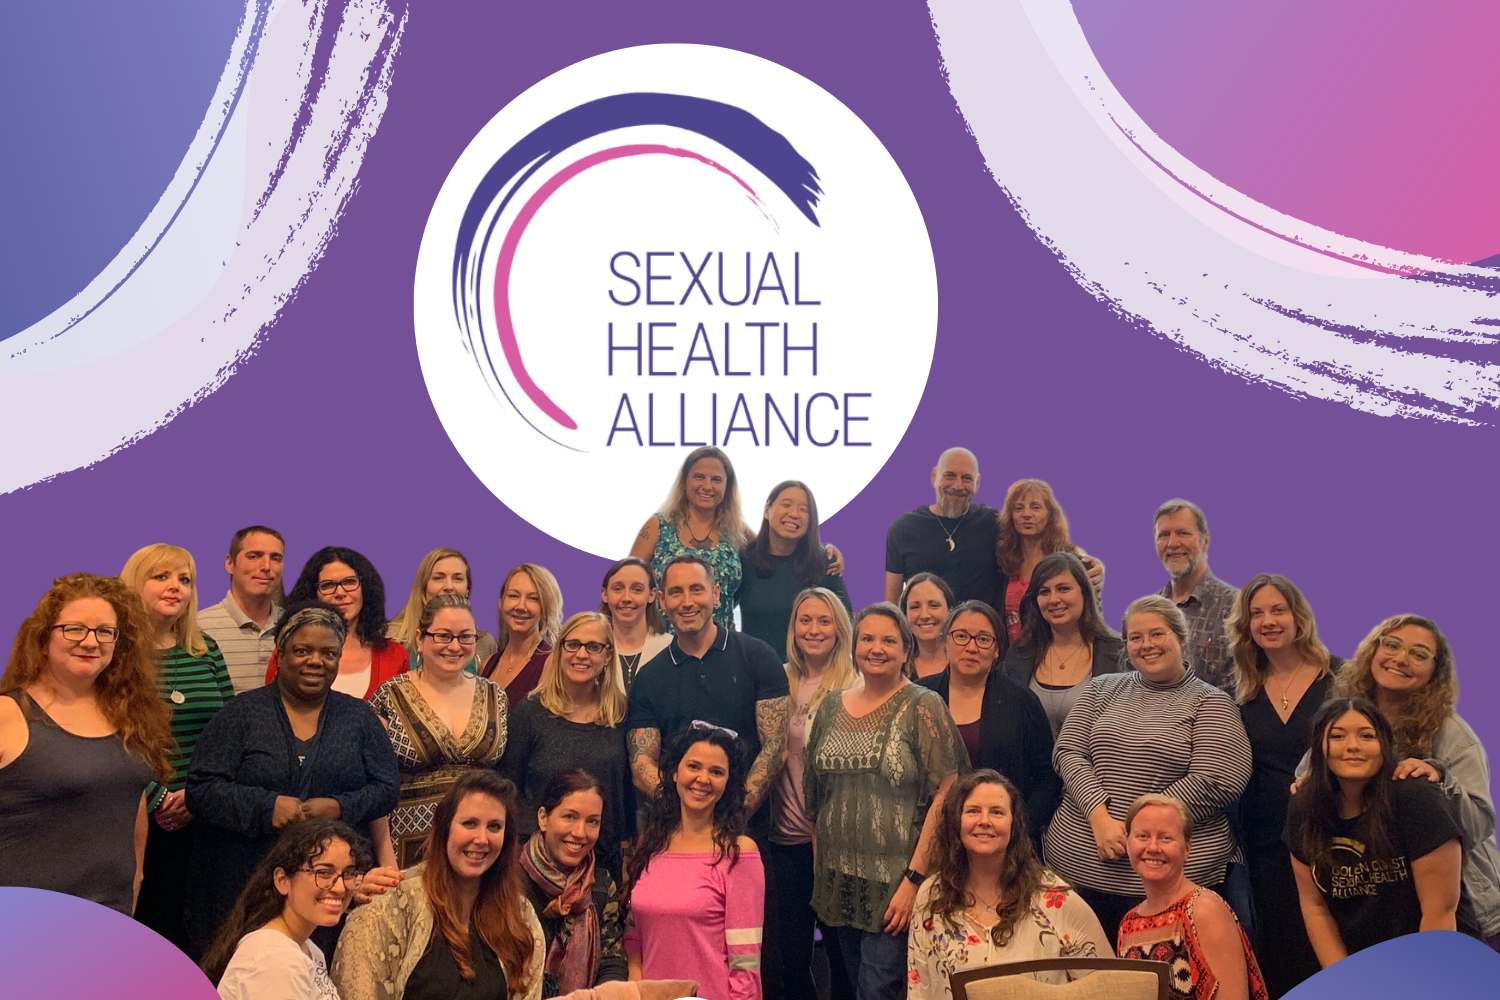 Sexual Health Alliance - Build the Career of Your Dreams